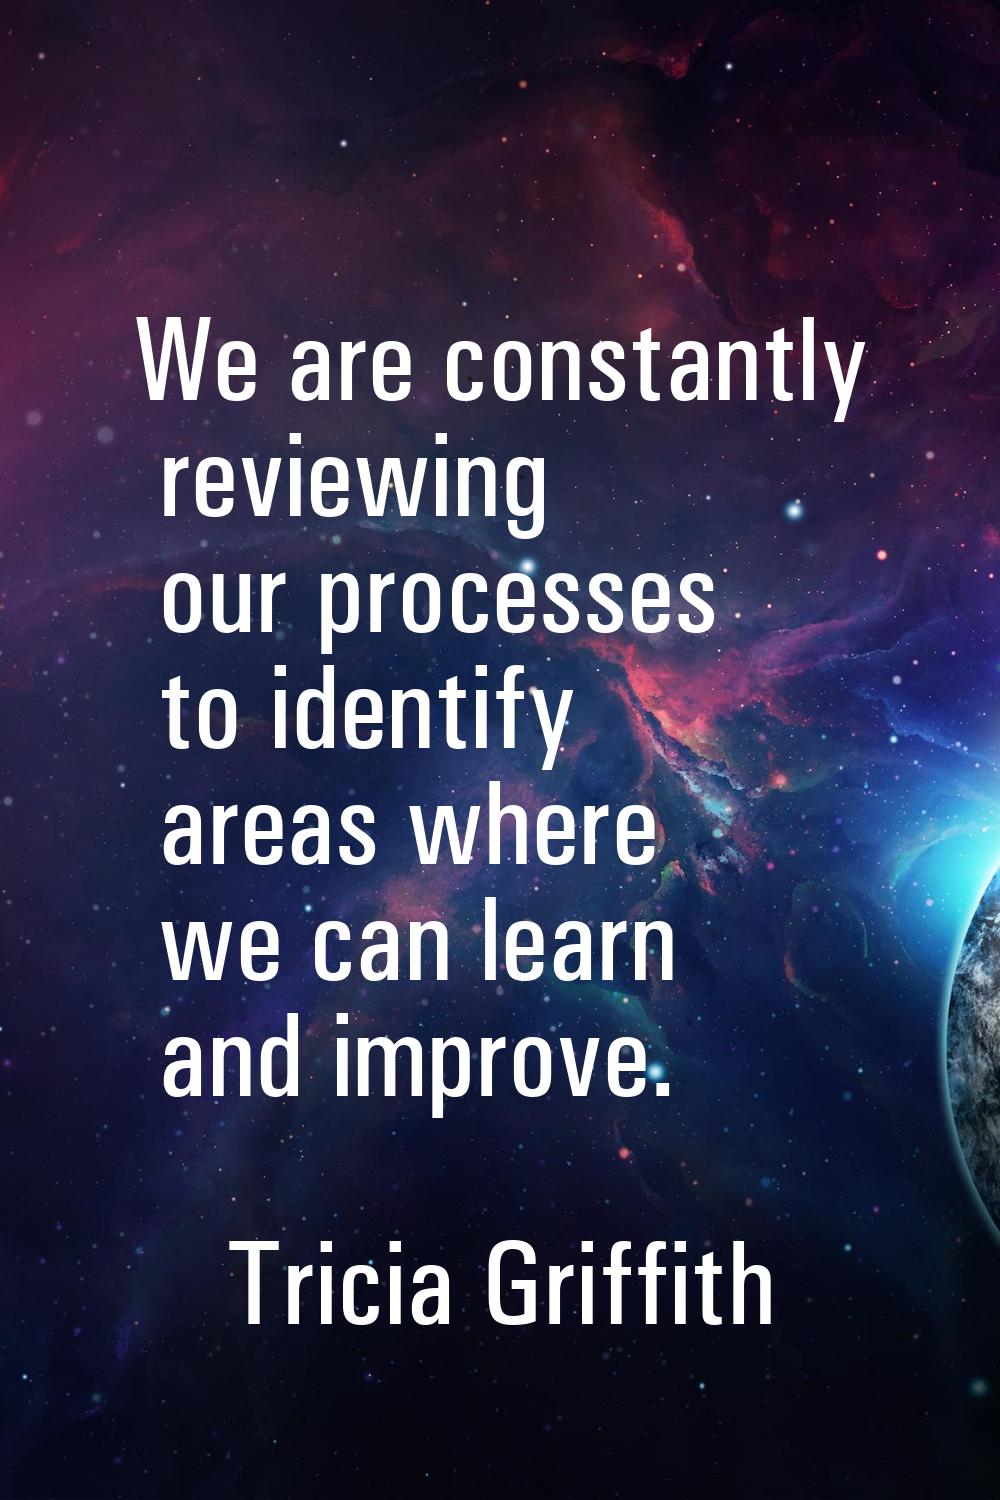 We are constantly reviewing our processes to identify areas where we can learn and improve.